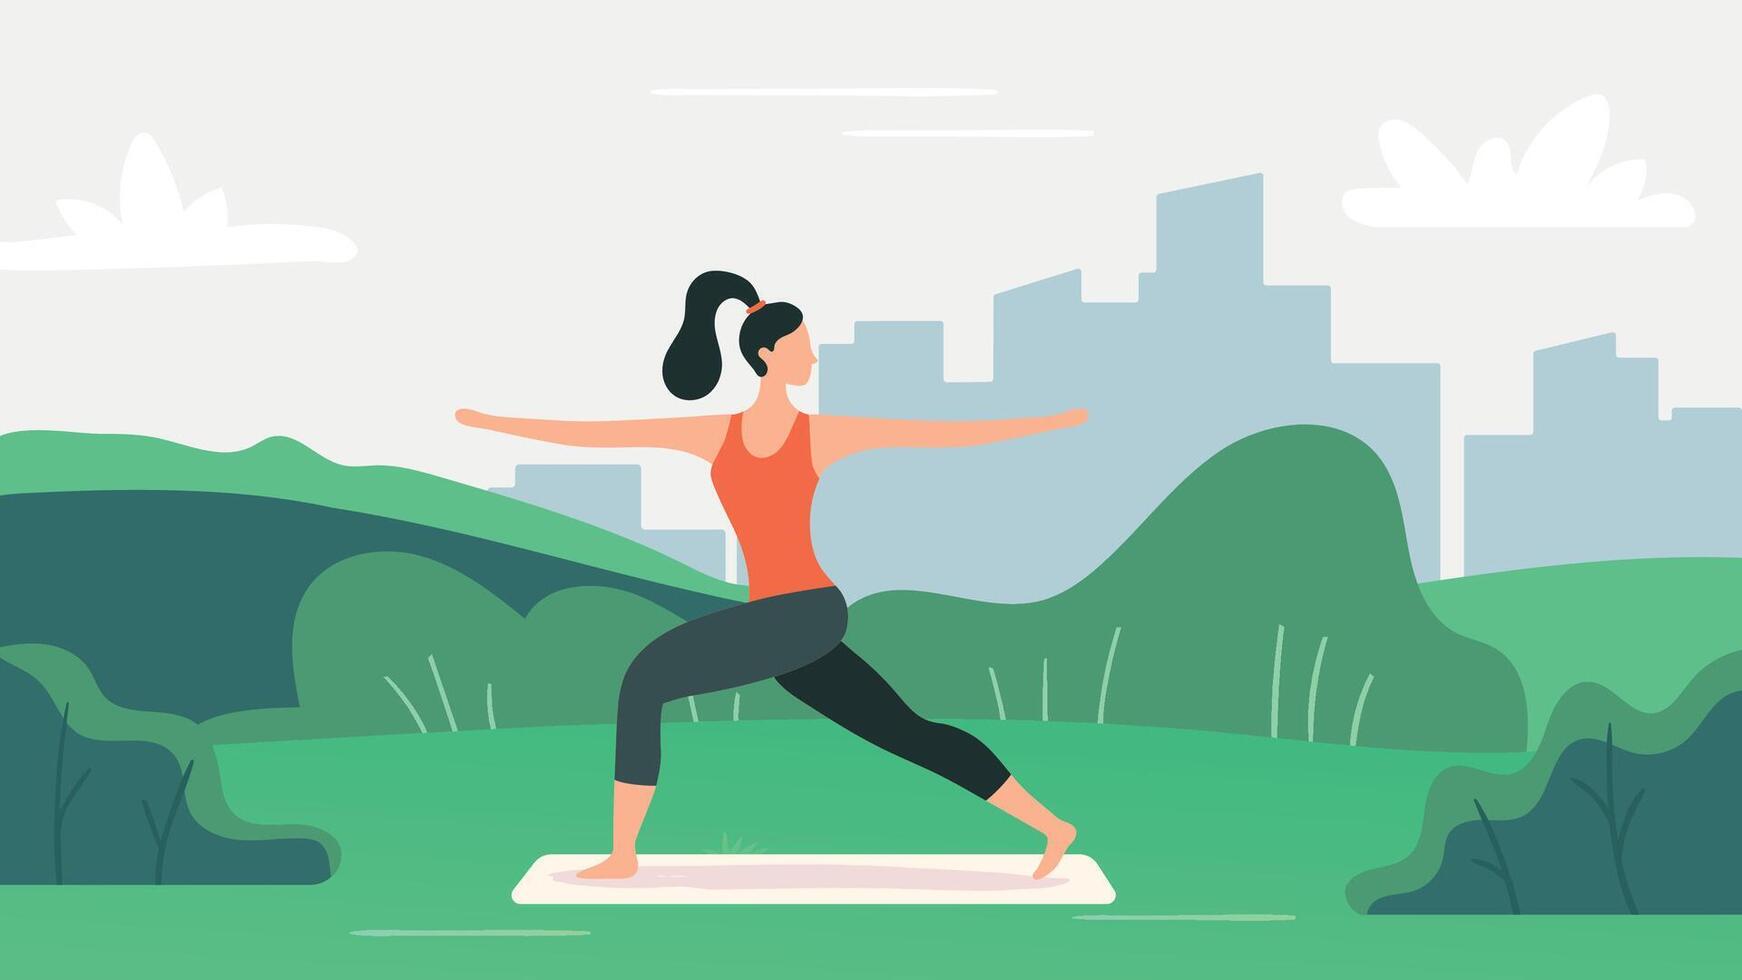 Yoga exercise on nature. Woman doing sport outdoor on mat. Young female character practicing yoga poses on green lawn vector